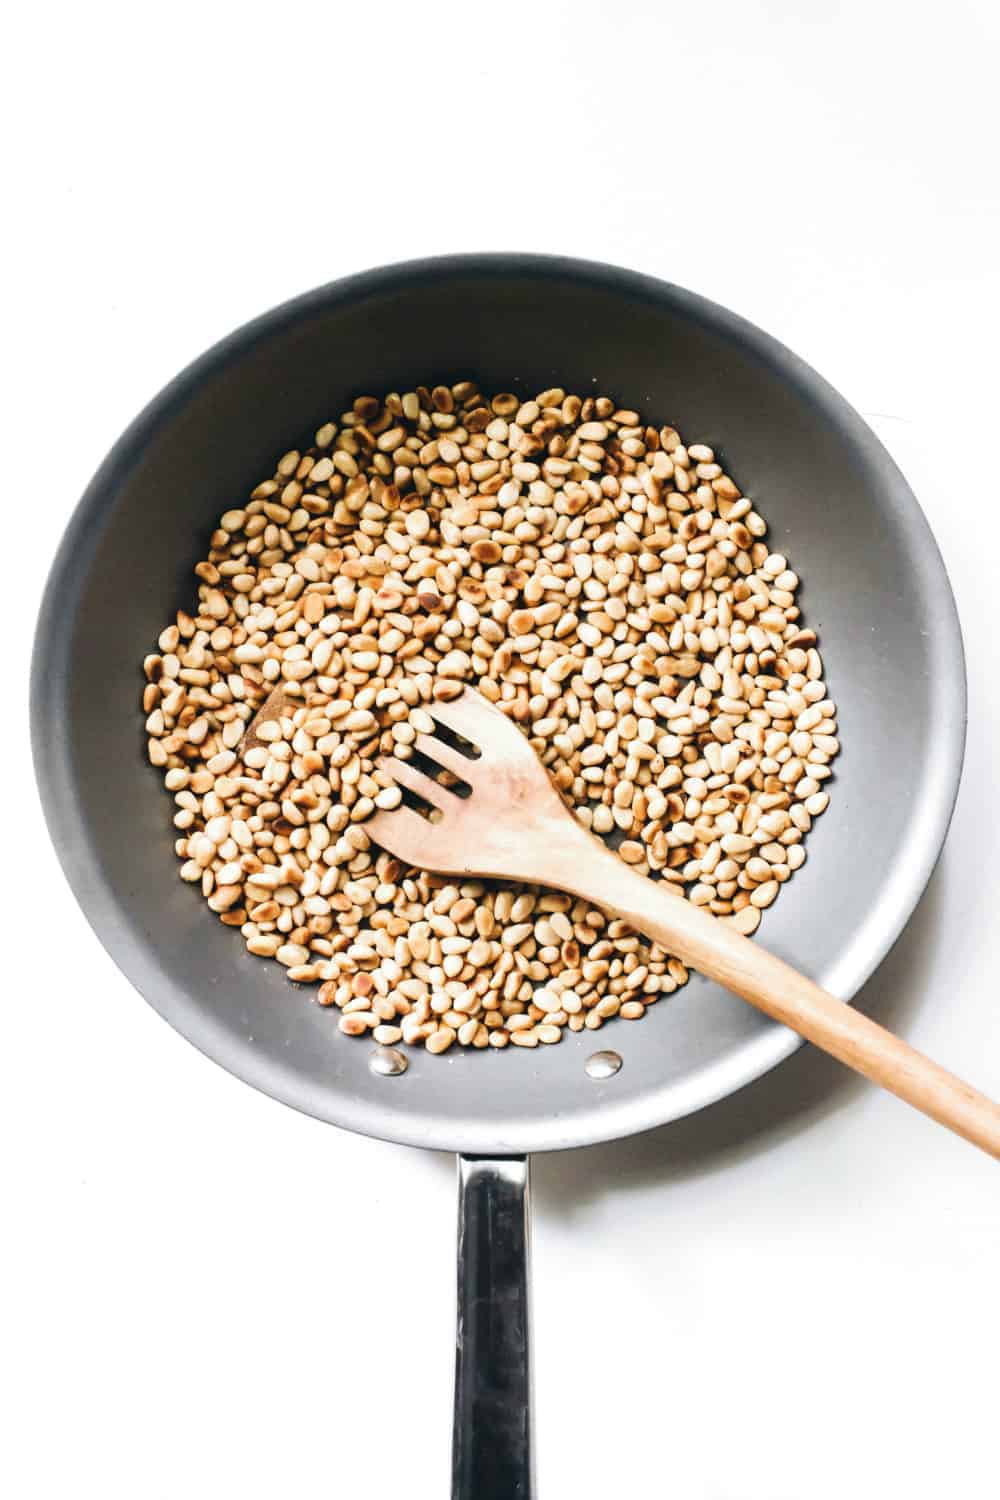 Toasted pine nuts in a skillet being stirred with a wooden spoon